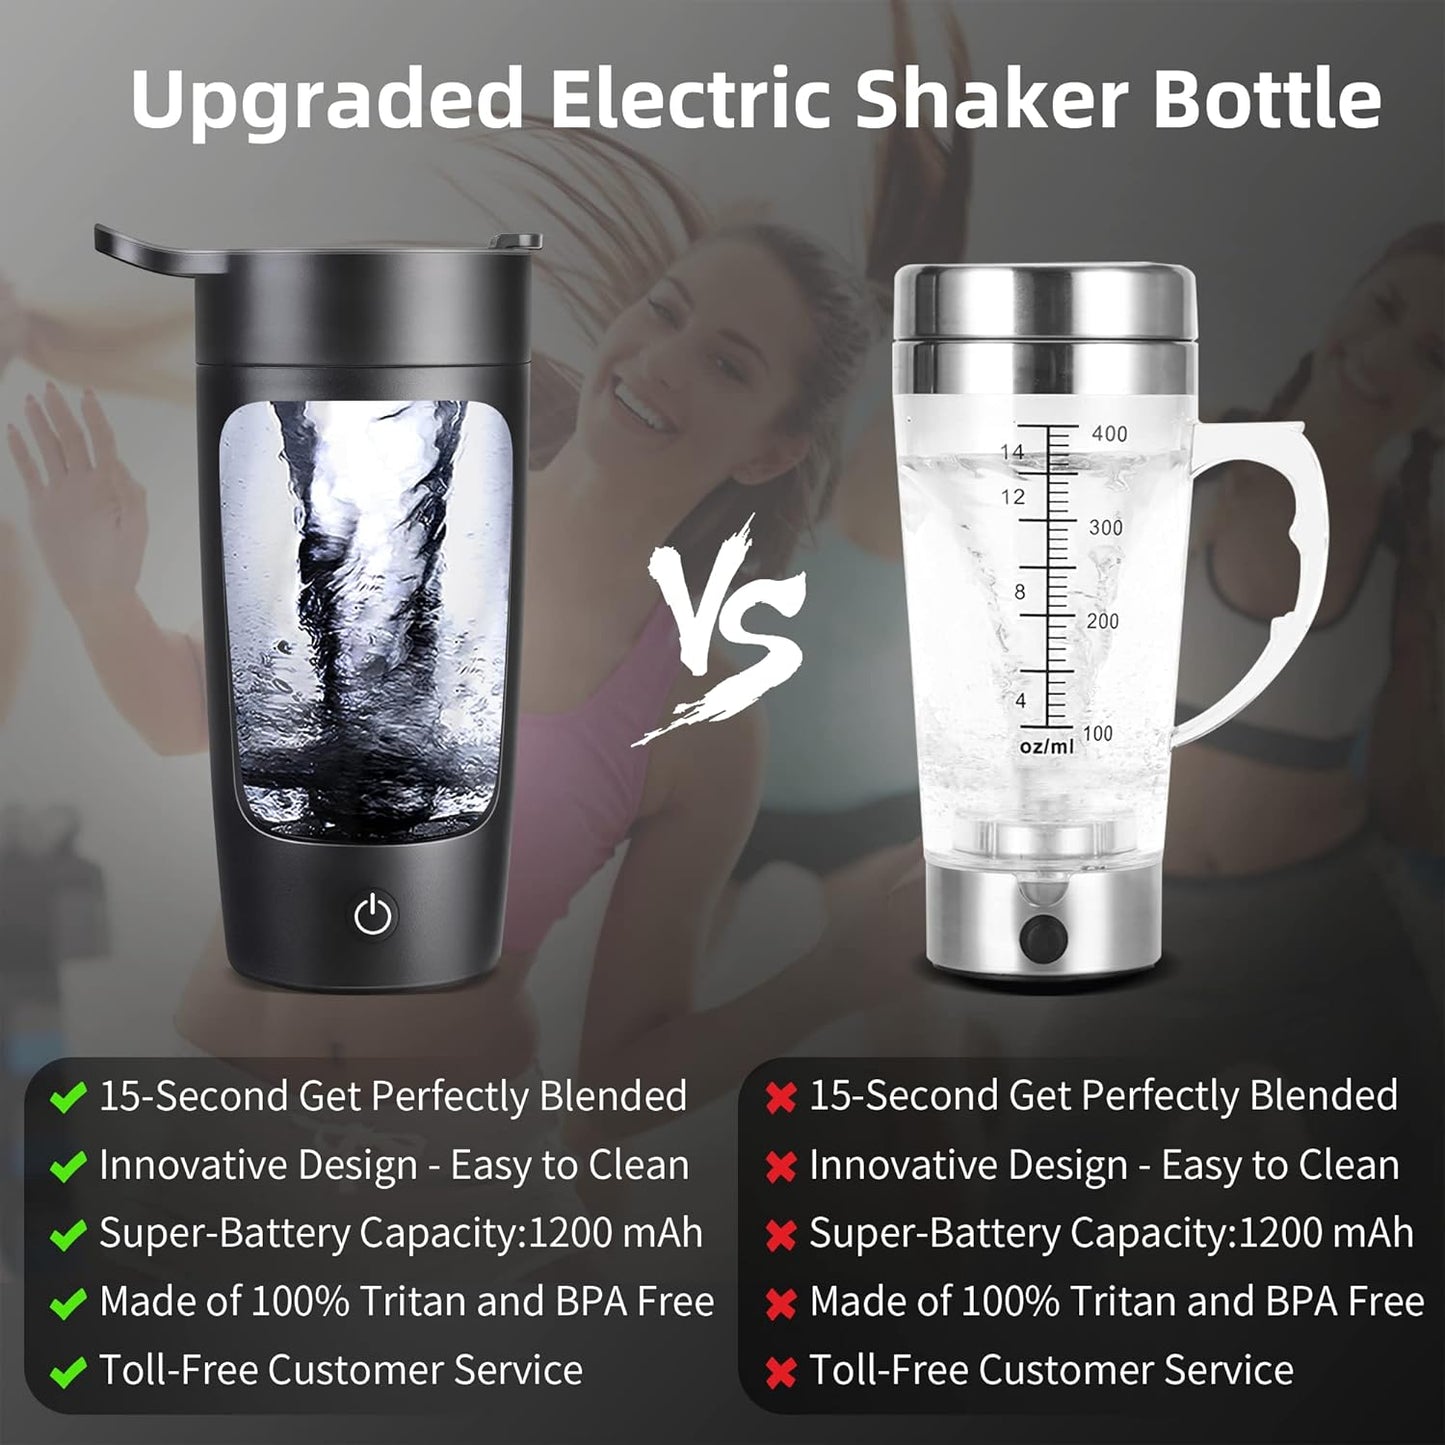 22oz Electric Shaker Bottle: USB-Rechargeable Protein Shaker for Protein Mixes, Coffee, Milkshakes (Black)